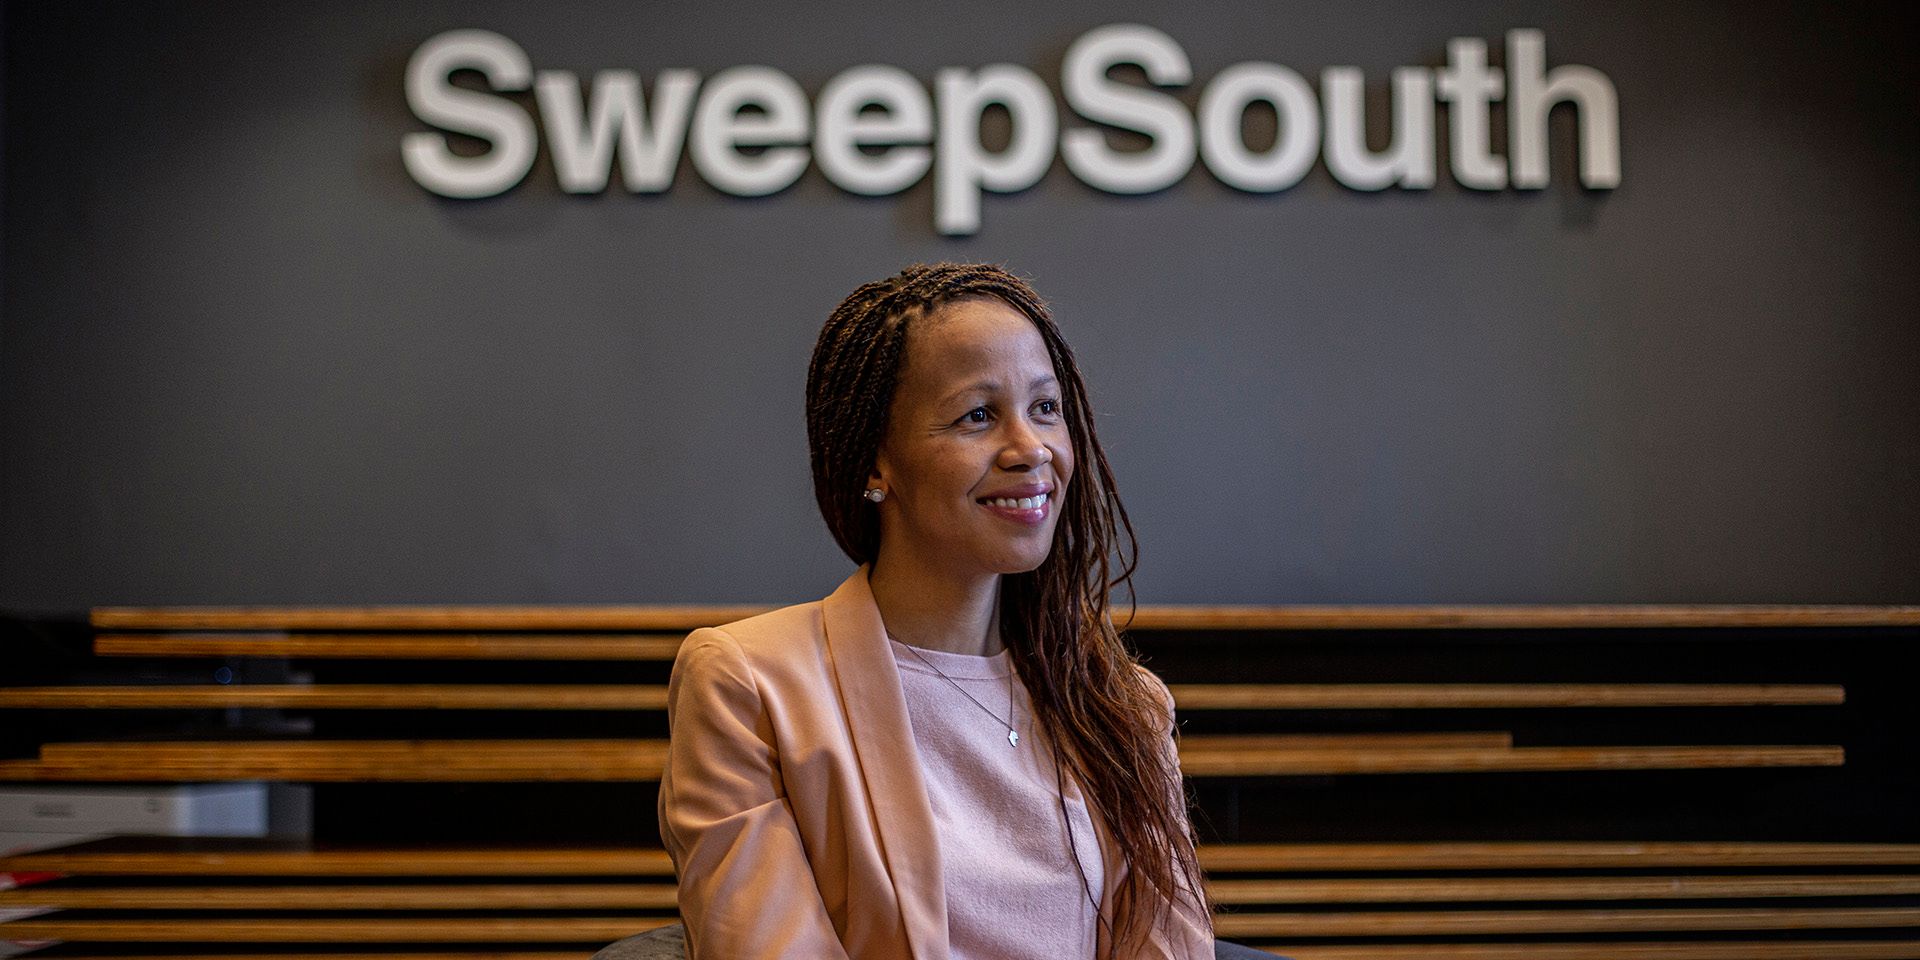 CAPE TOWN, SOUTH AFRICA - OCTOBER 29: 
Aisha Pandor, CEO and Co-founder SweepSouth, at the SweepSouth offices in Cape Town, South Africa, on the morning of October 29, 2020. SweepSouth is a tech company that matches domestic workers with homeowners through an app.

Photo © Charlie Shoemaker/International Finance Corporation